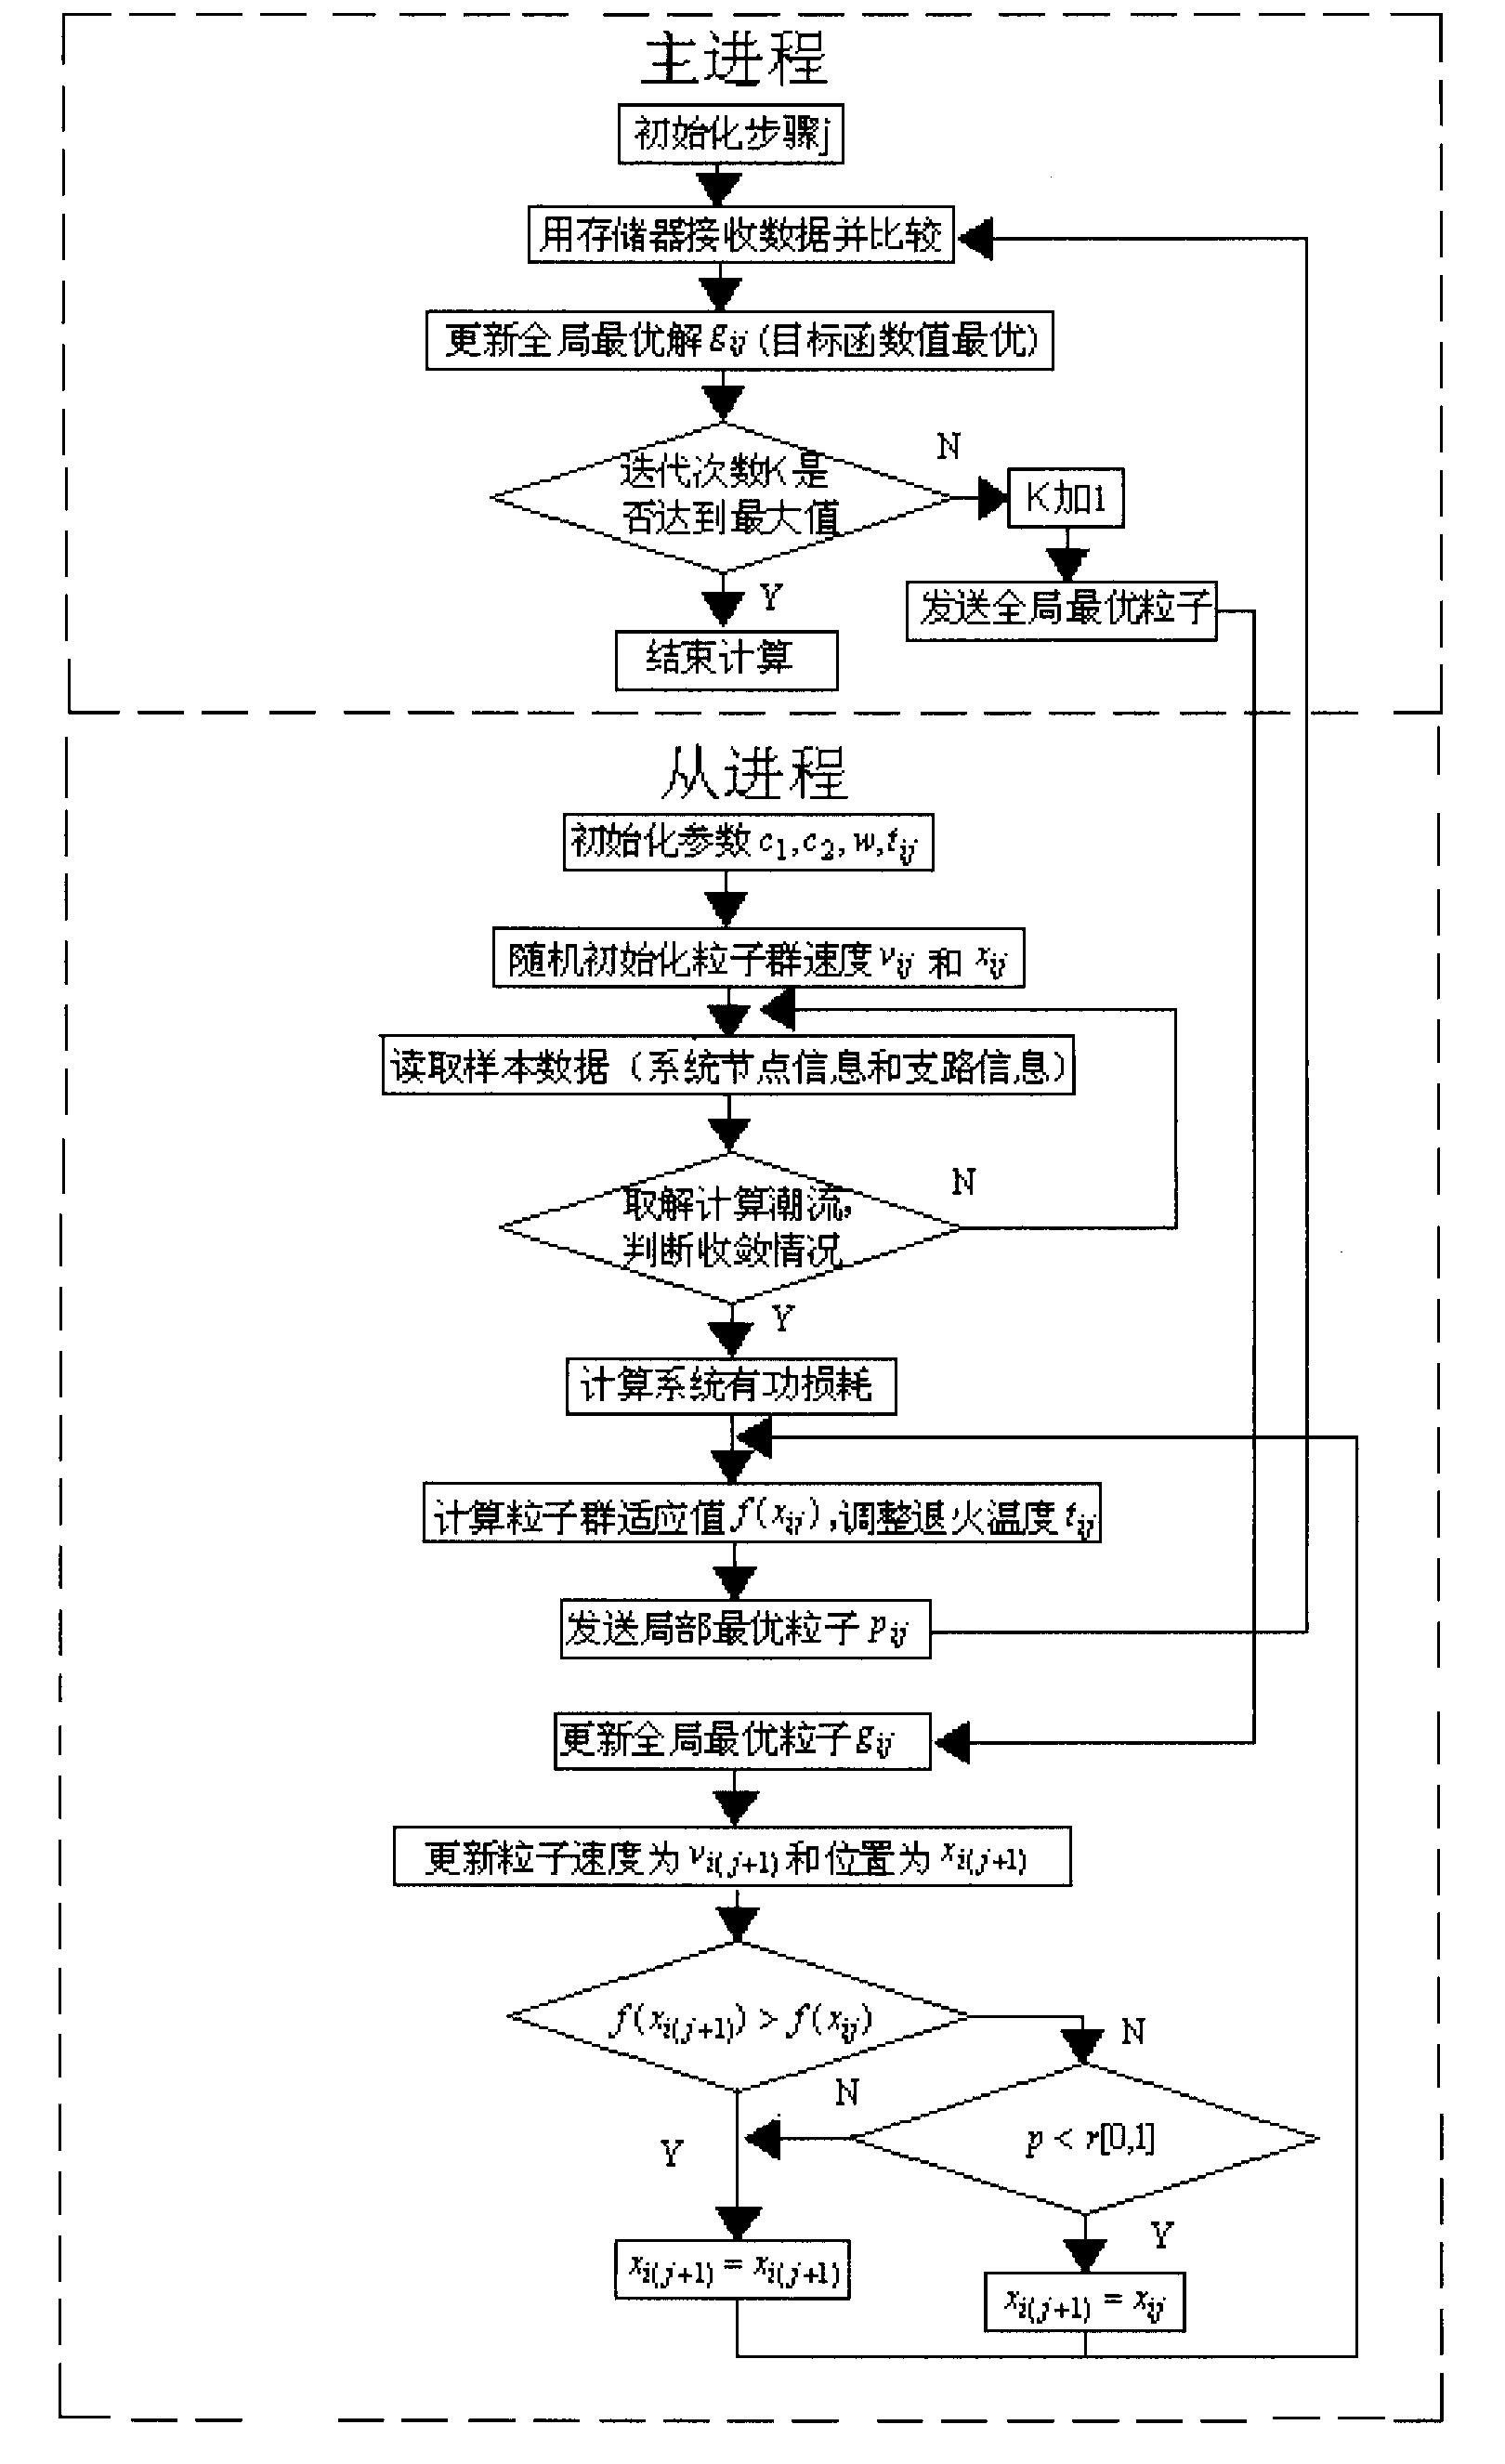 Mathematical model for optimal configuration of power distribution network filtering devices